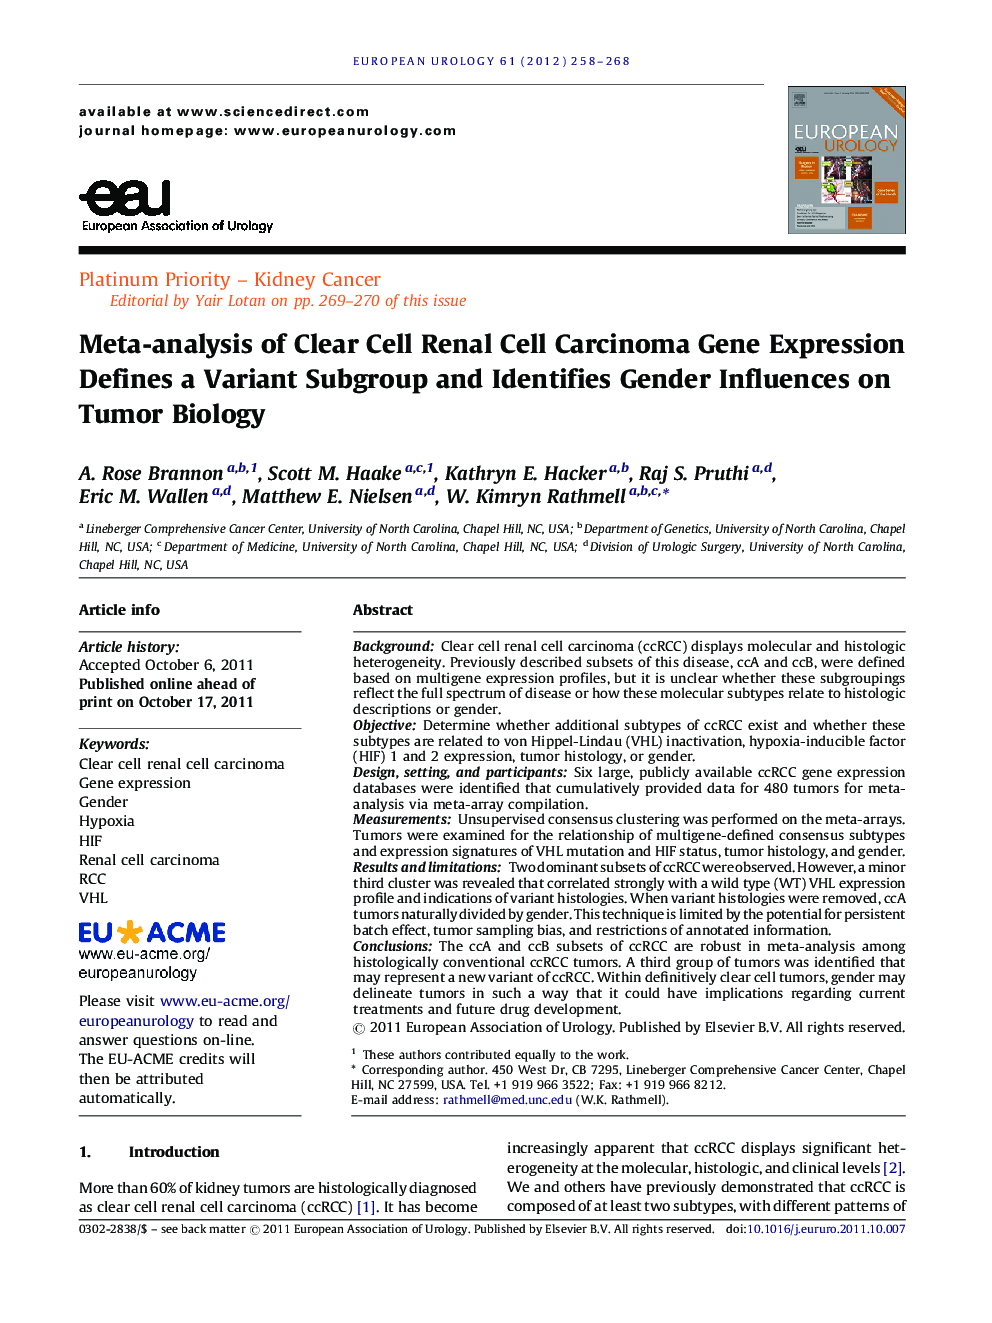 Meta-analysis of Clear Cell Renal Cell Carcinoma Gene Expression Defines a Variant Subgroup and Identifies Gender Influences on Tumor Biology 